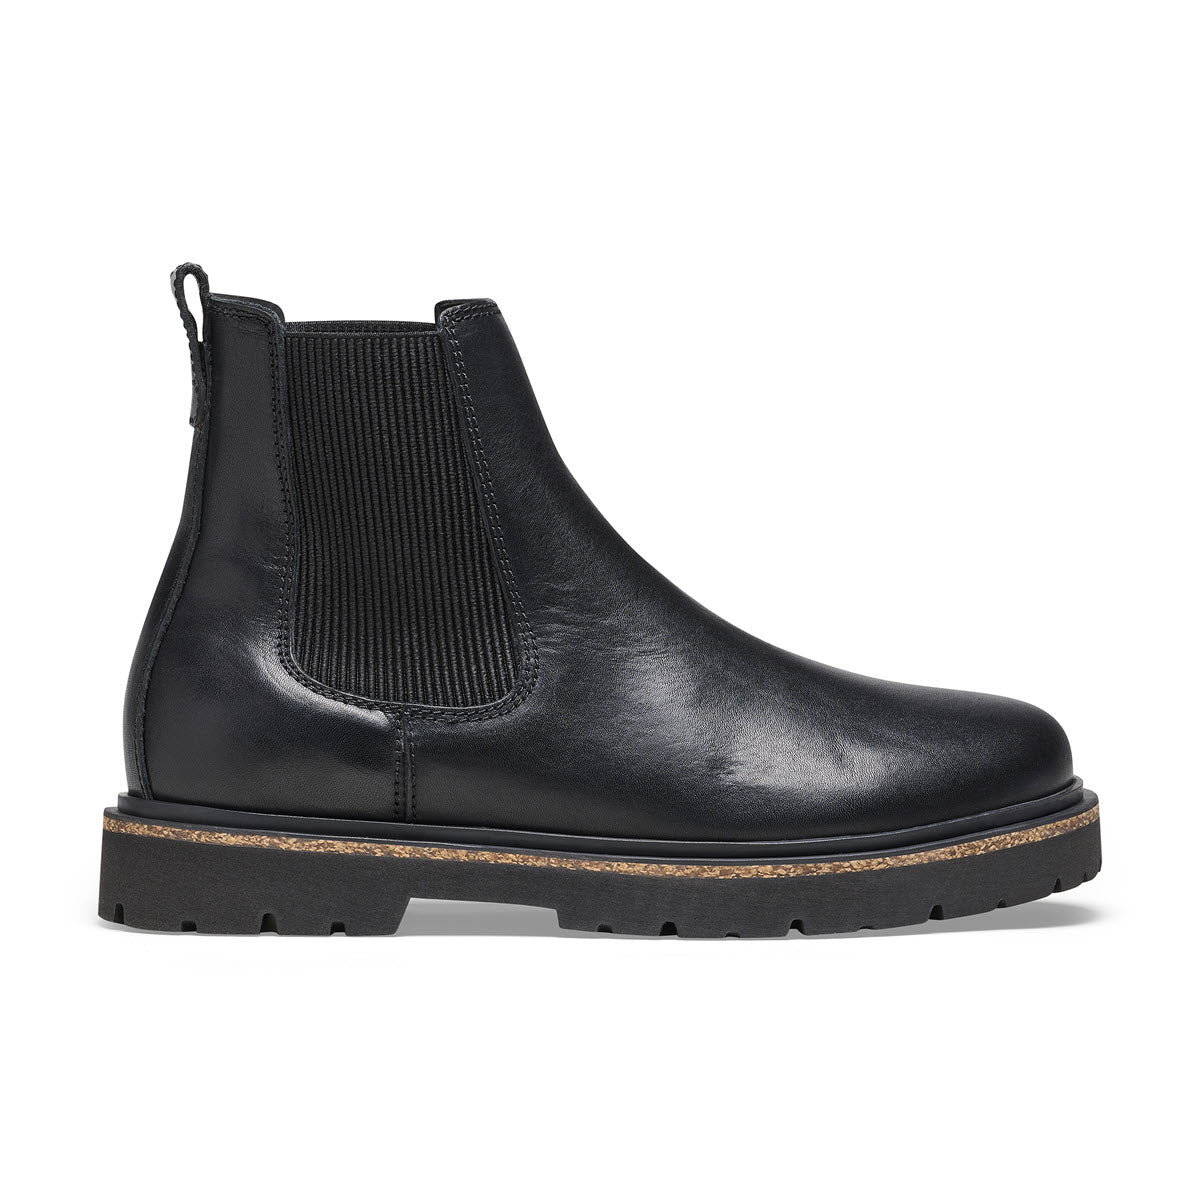 Birkenstock Highwood Deep Blue black leather Chelsea boot with elastic side panels and a chunky, ridged sole, isolated on a white background.